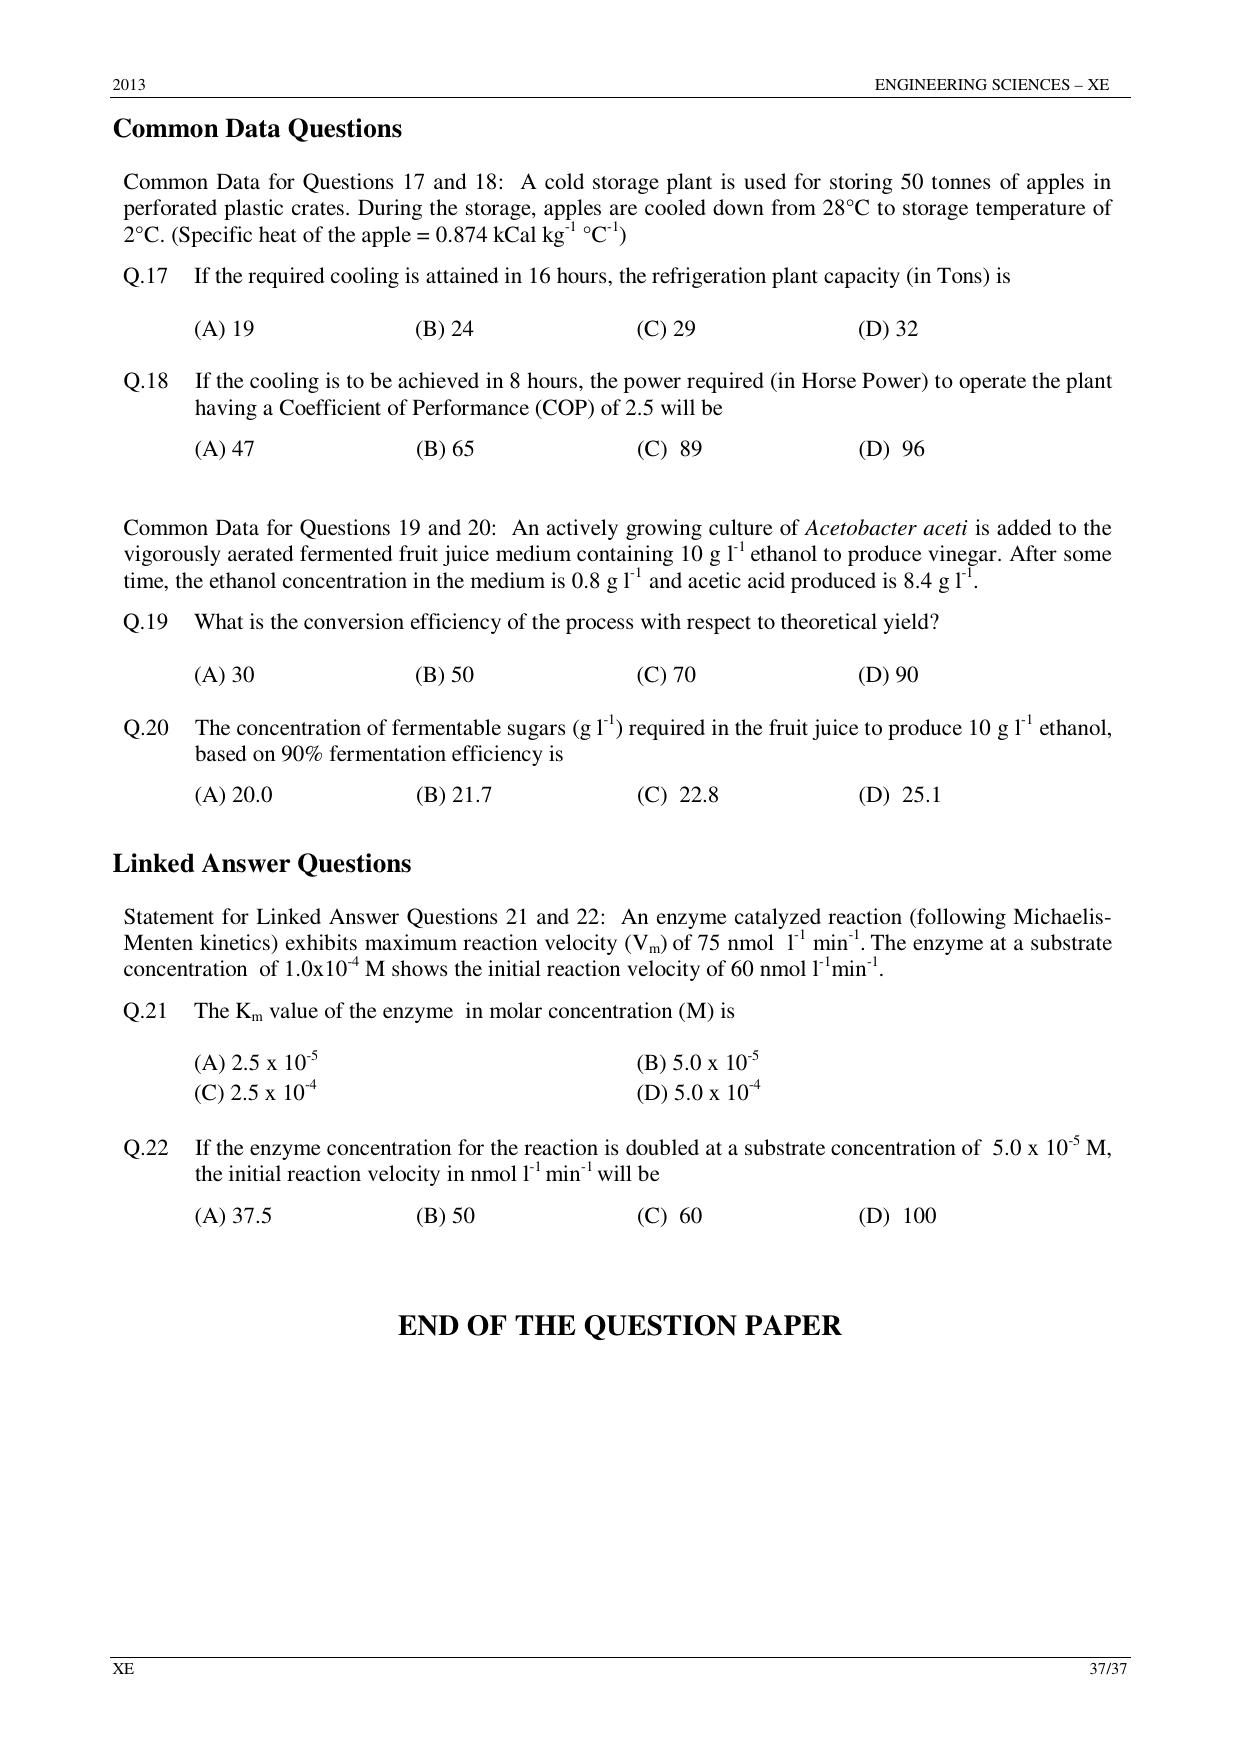 GATE 2013 Engineering Sciences (XE) Question Paper with Answer Key - Page 37